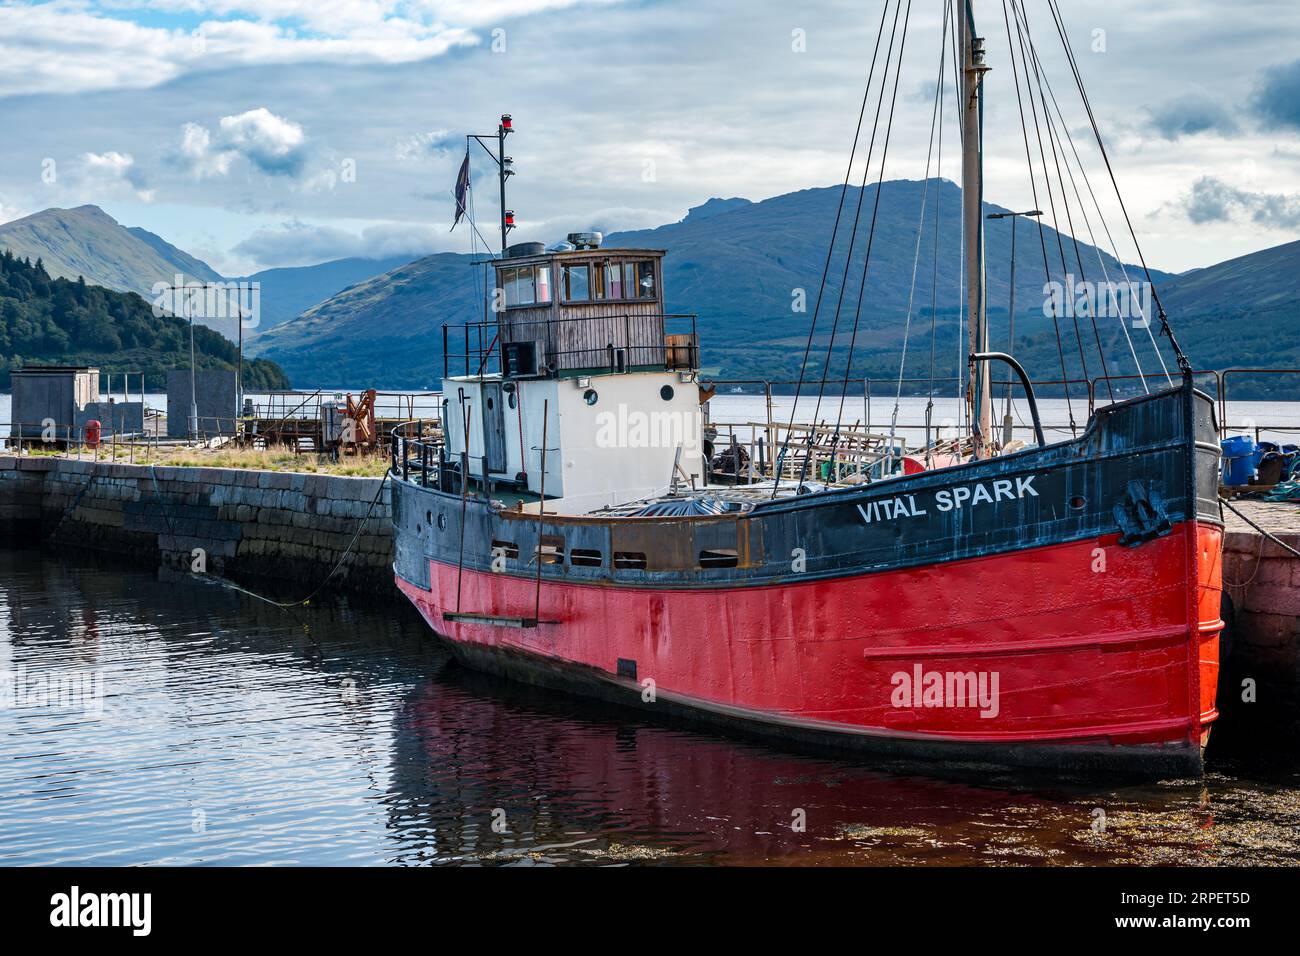 Old fishing vessel called Vital Spark moored in Loch Fyne,  Inverary, Argyll, Scotland, UK Stock Photo